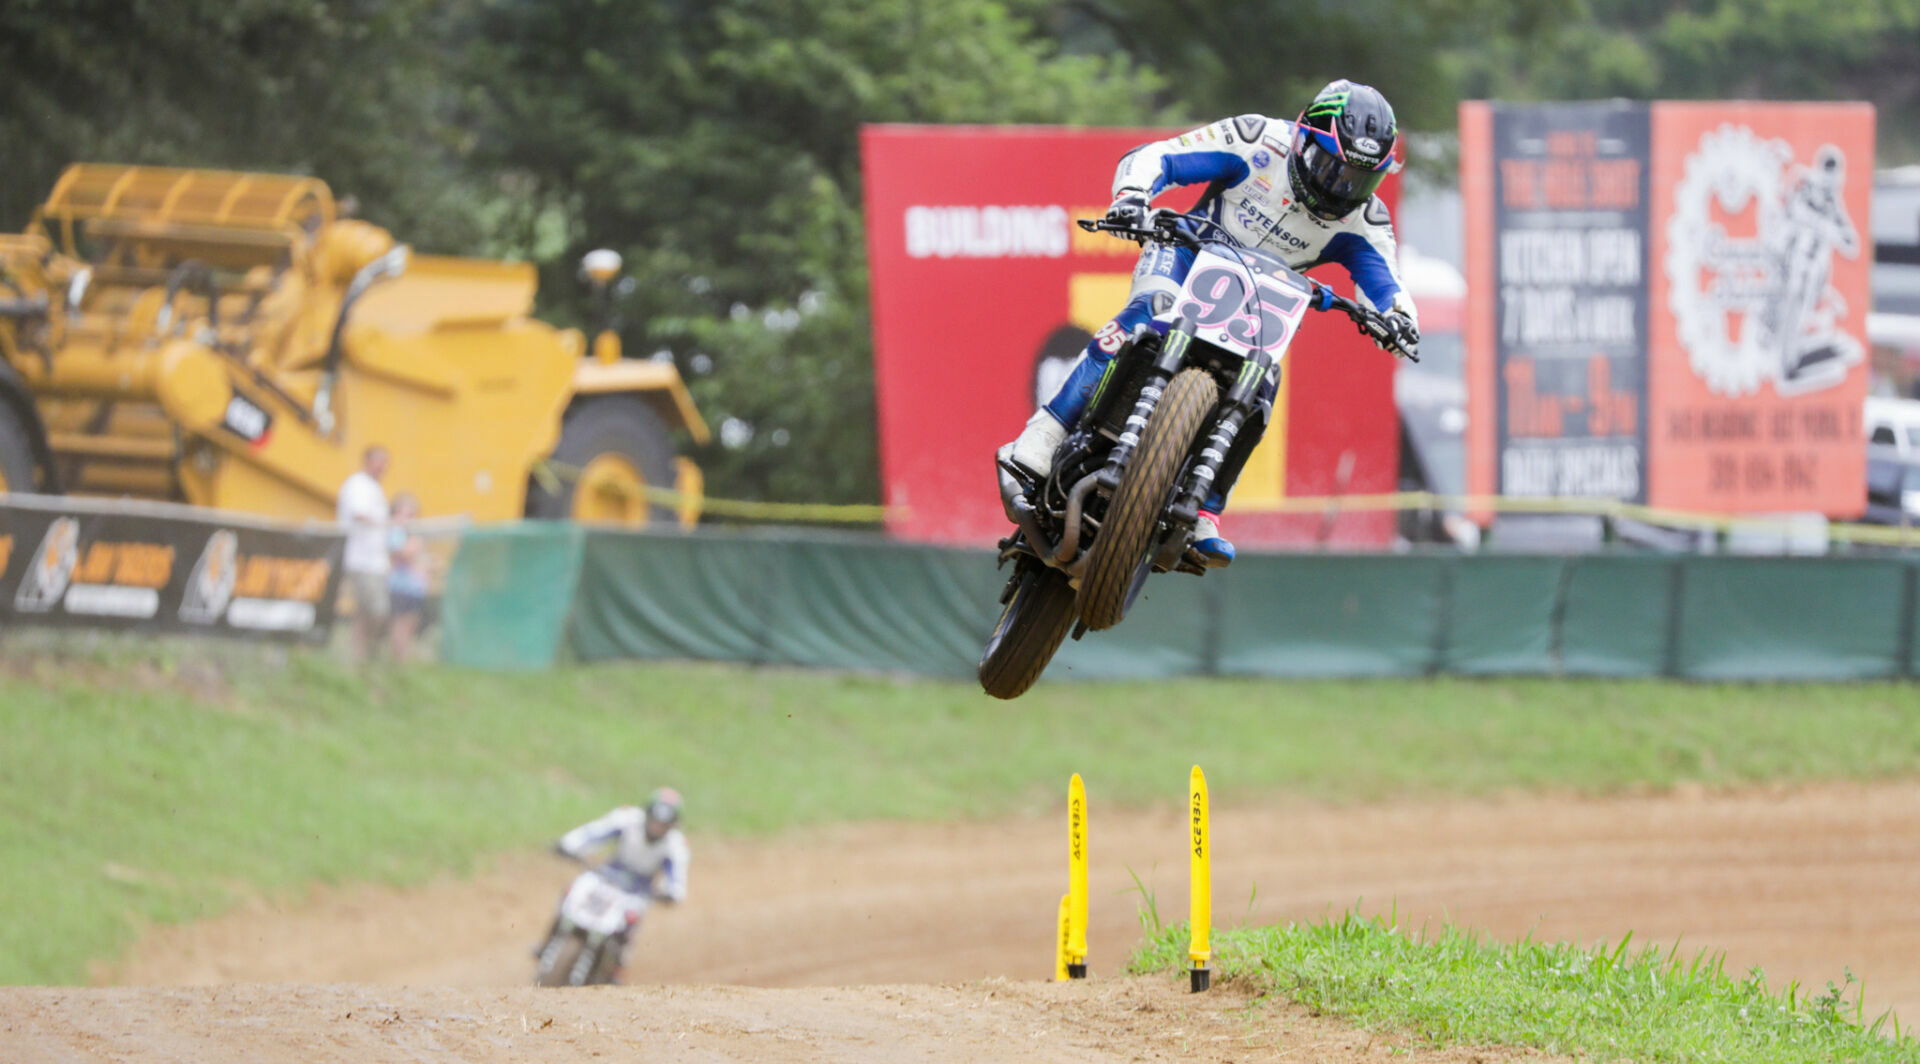 JD Beach (95) in action at the Peoria TT in 2021. Photo courtesy AFT.